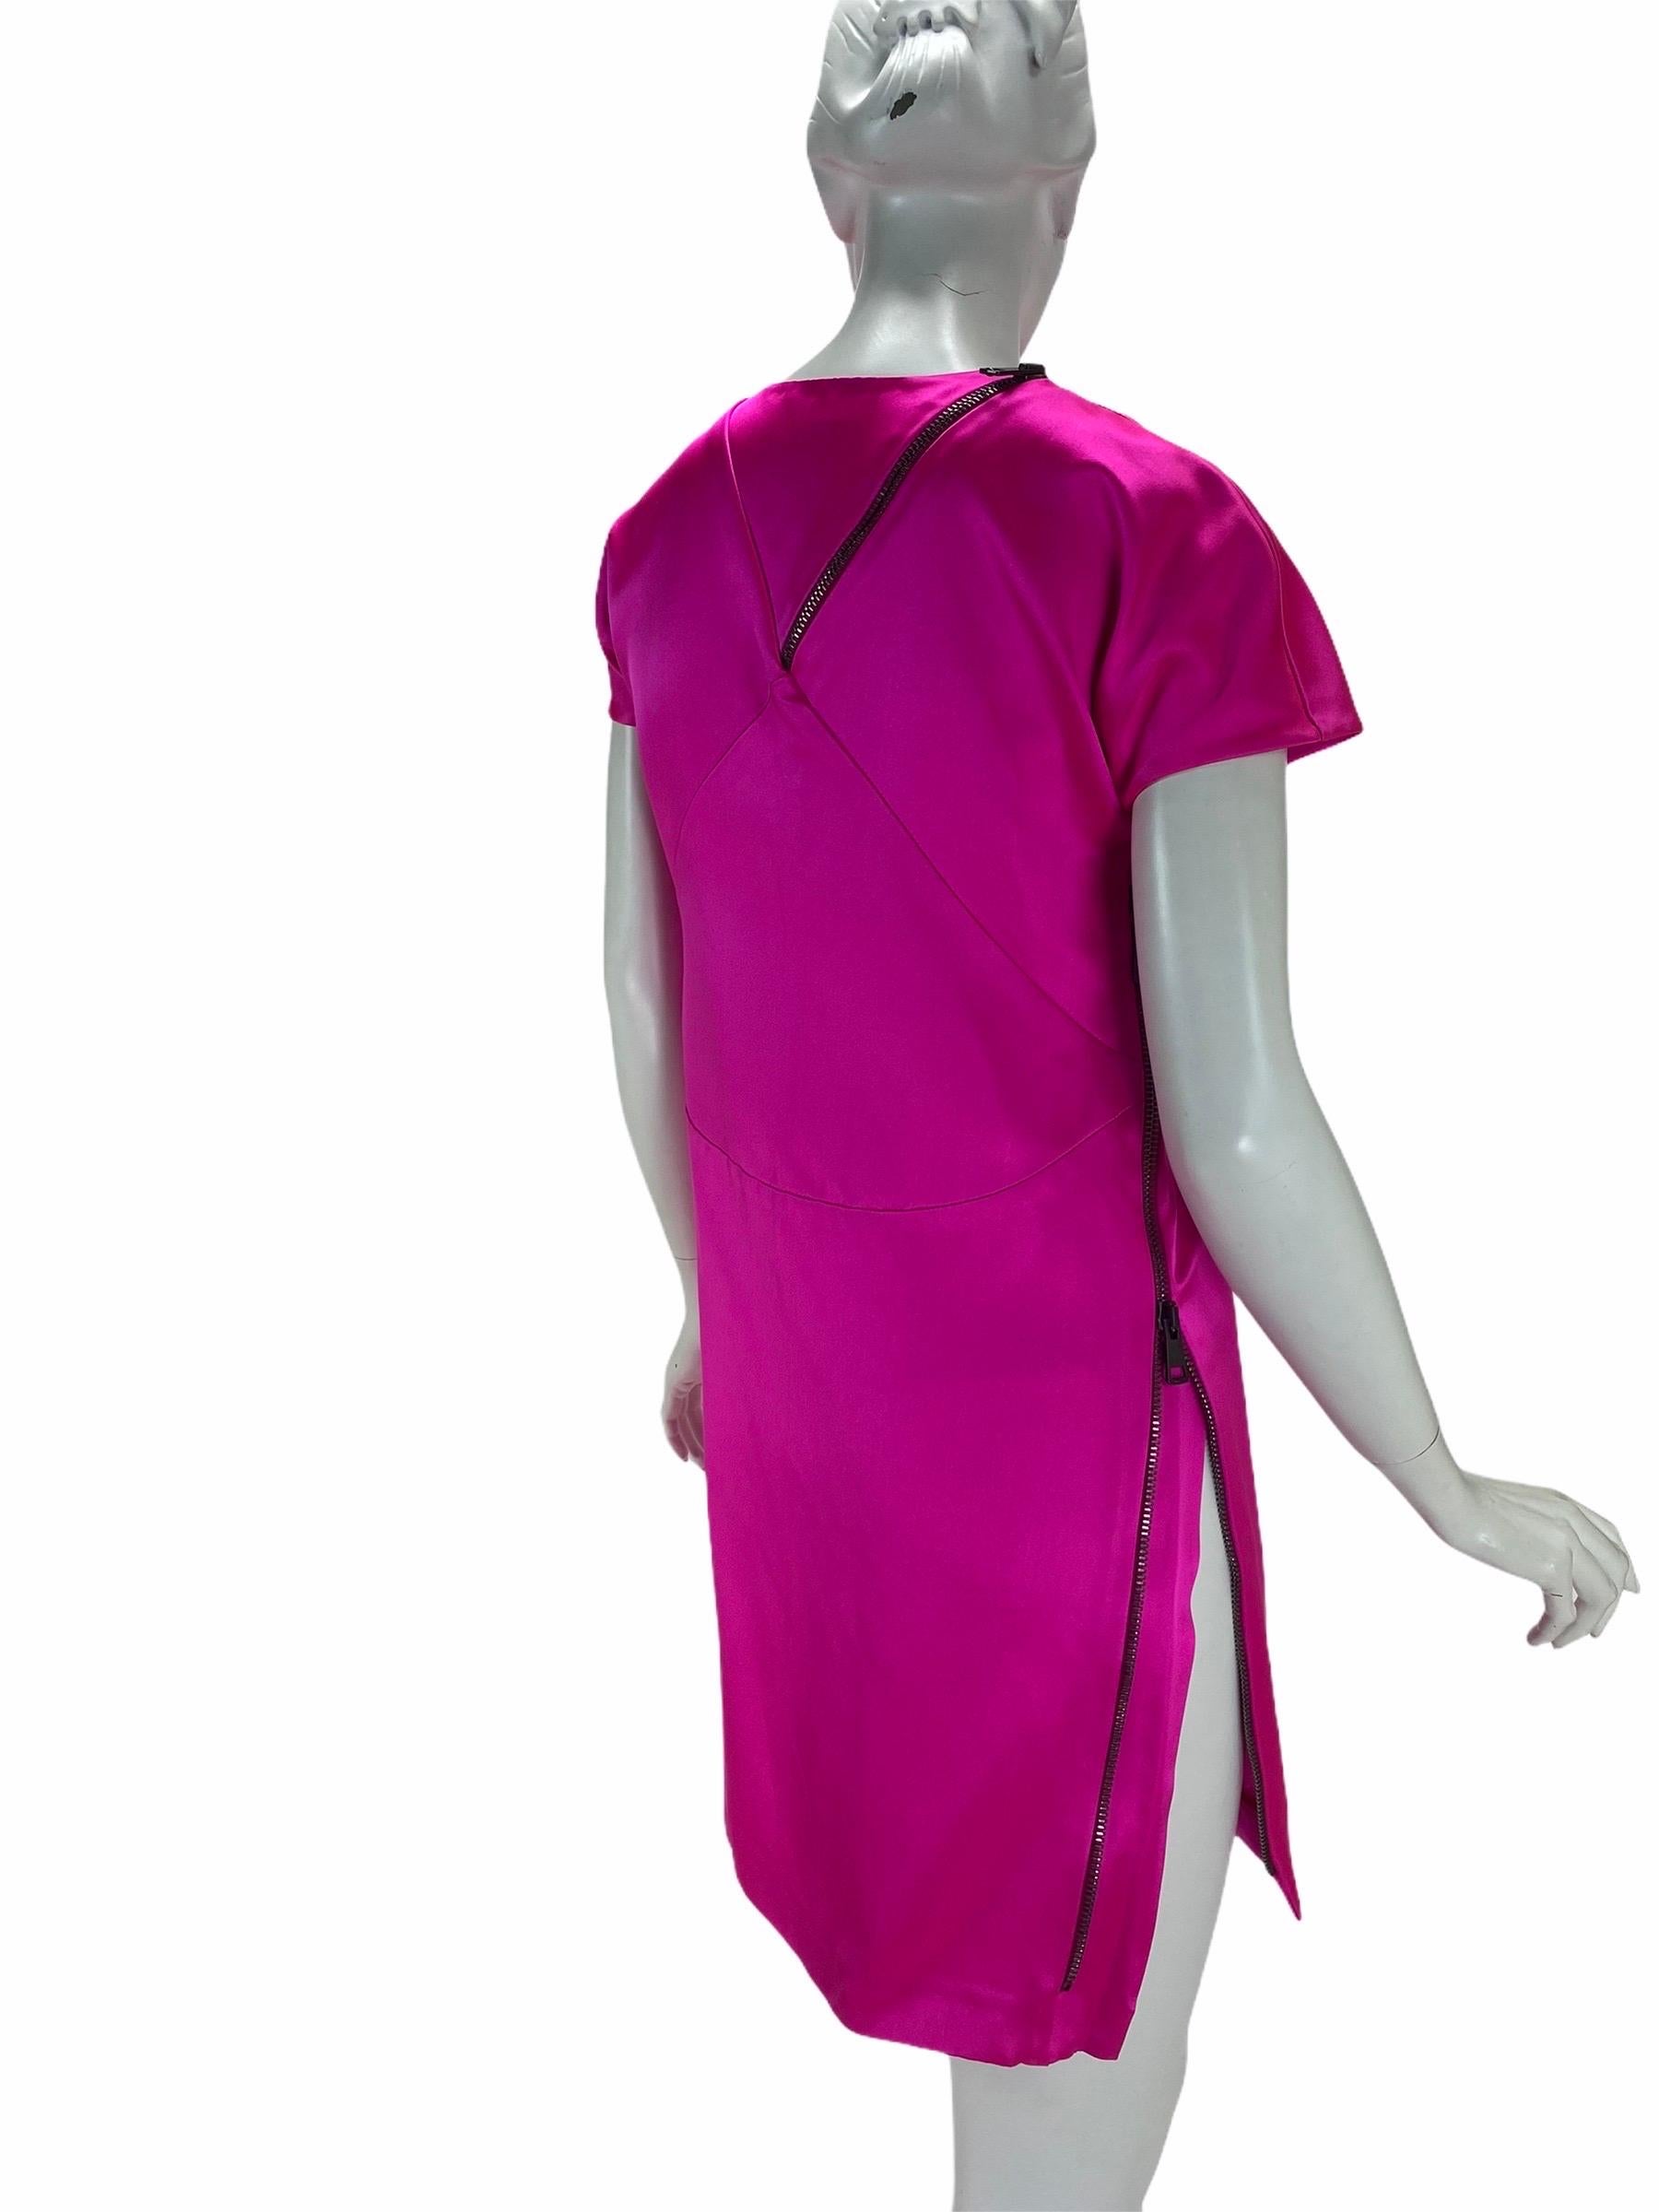 F/W 2001 Vintage Tom Ford for Gucci Hot Pink Dress with Exposed Zipper  In Excellent Condition For Sale In Montgomery, TX